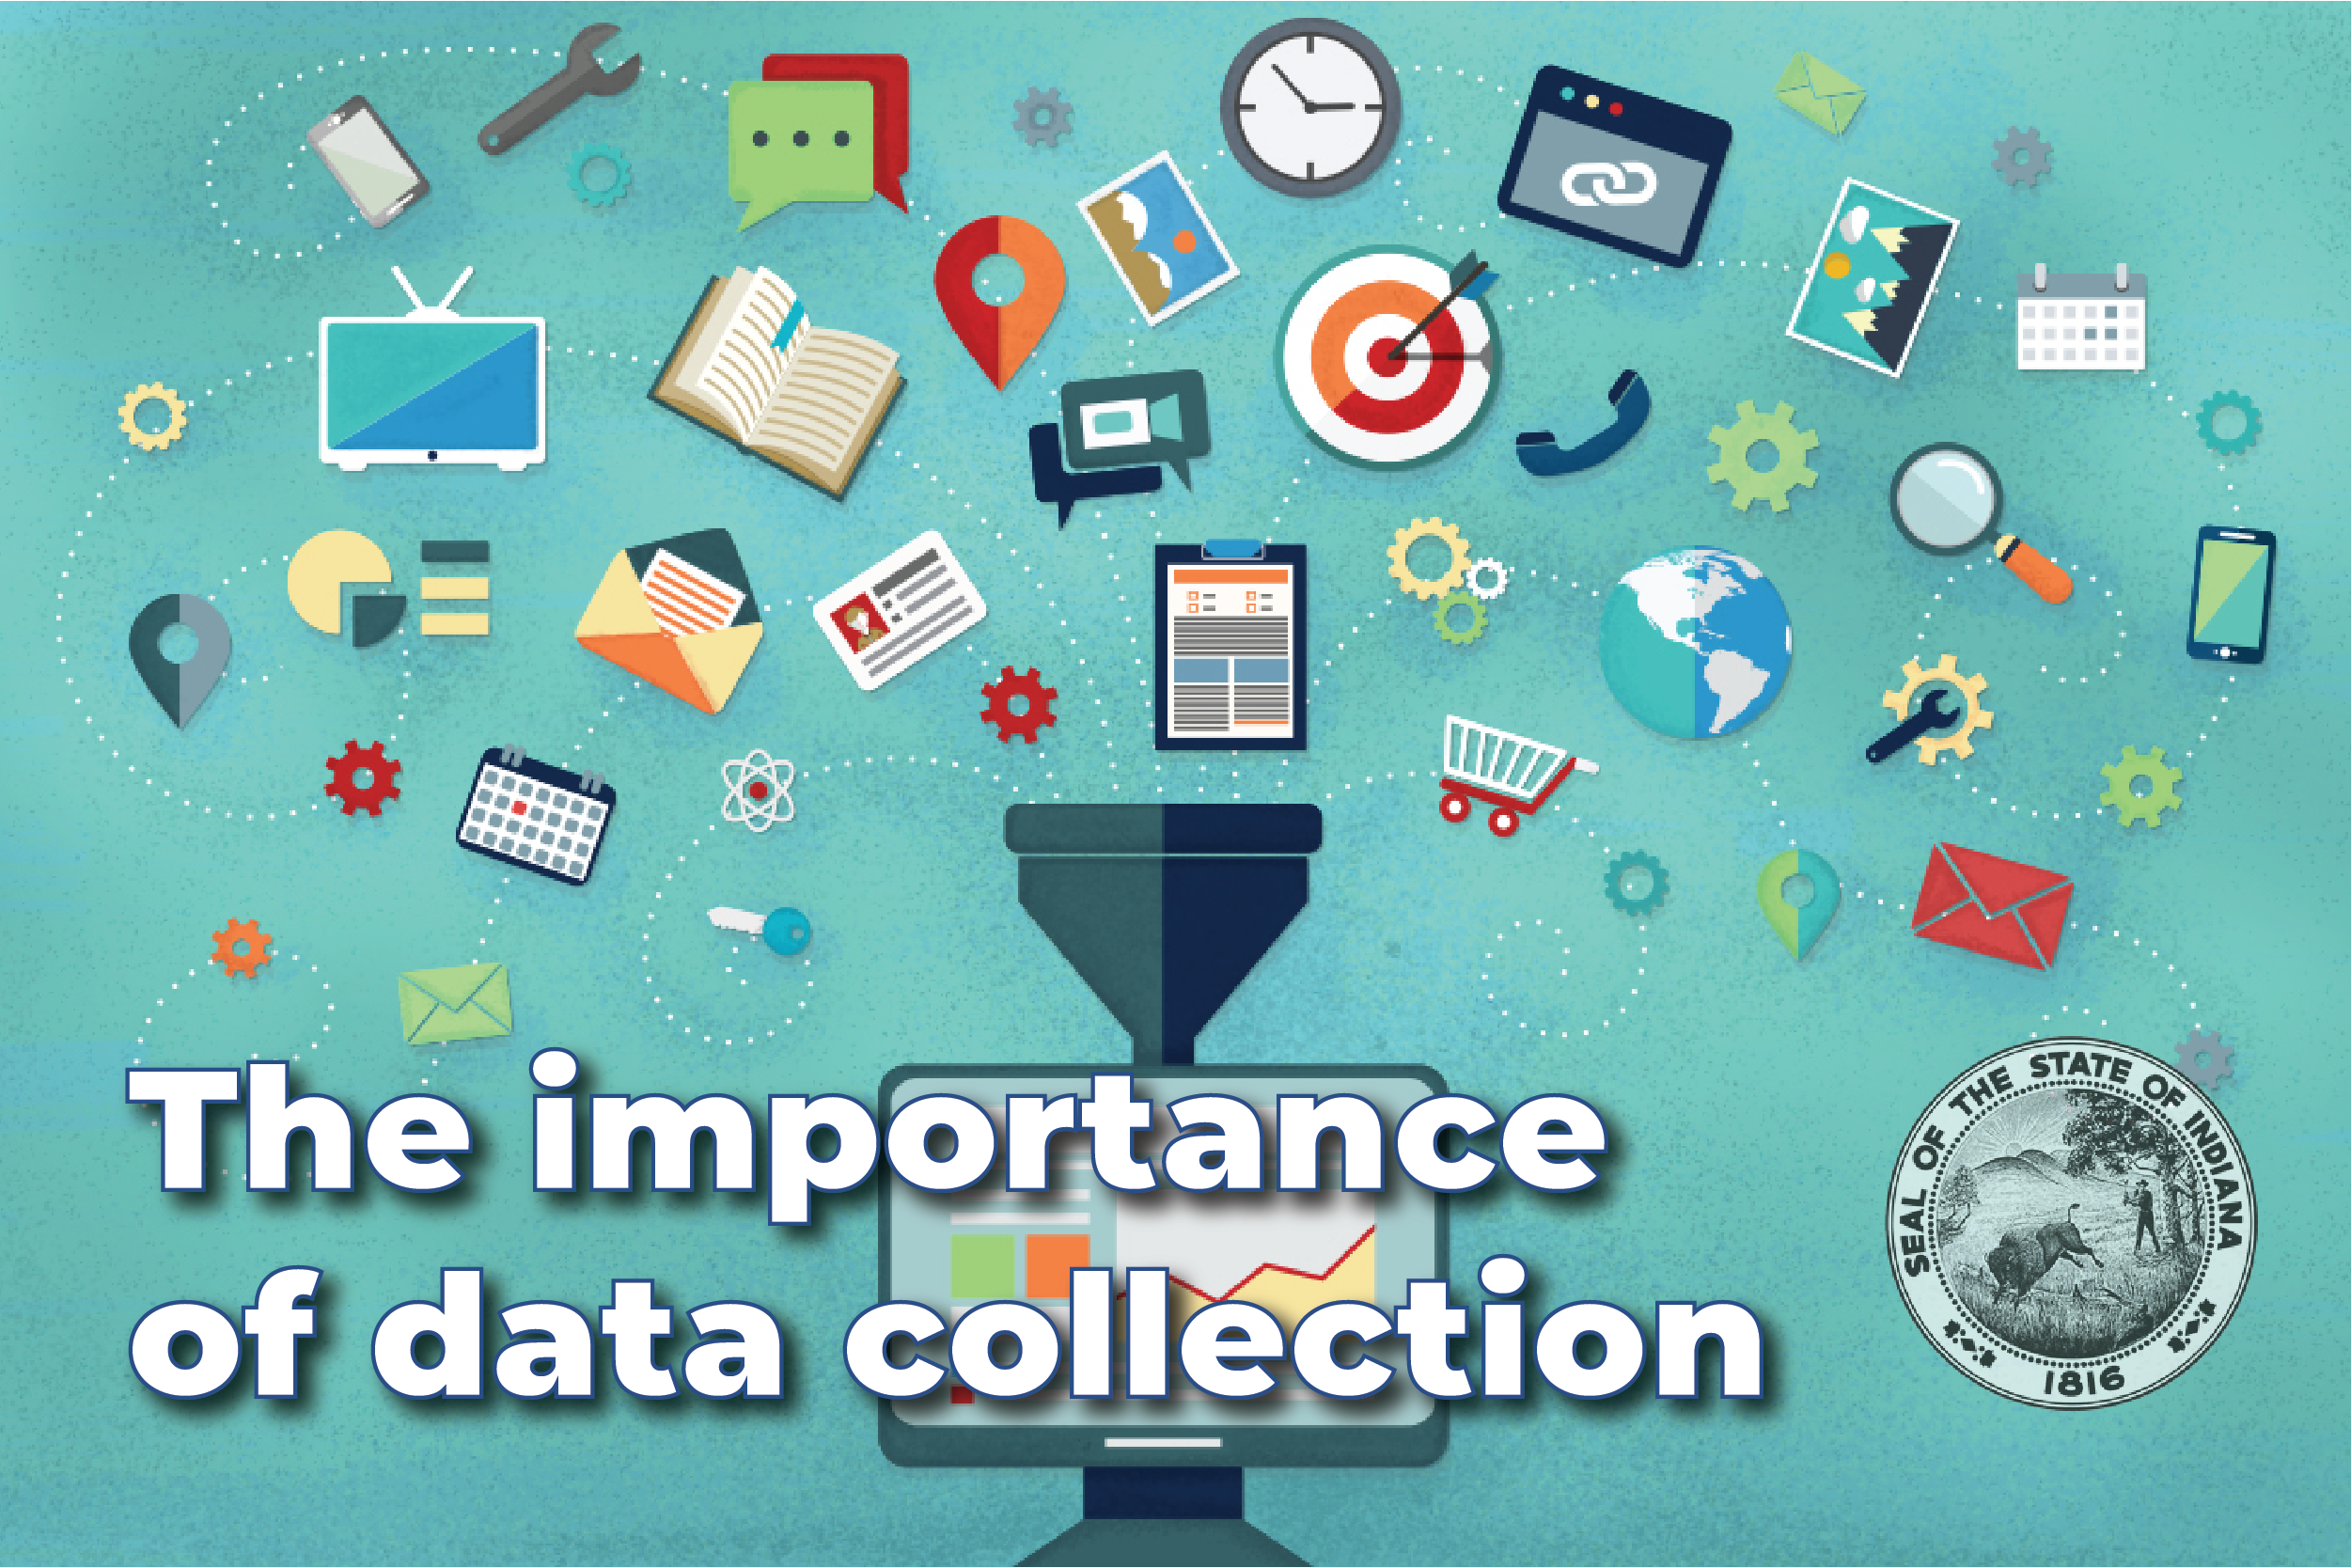 The importance of data collection